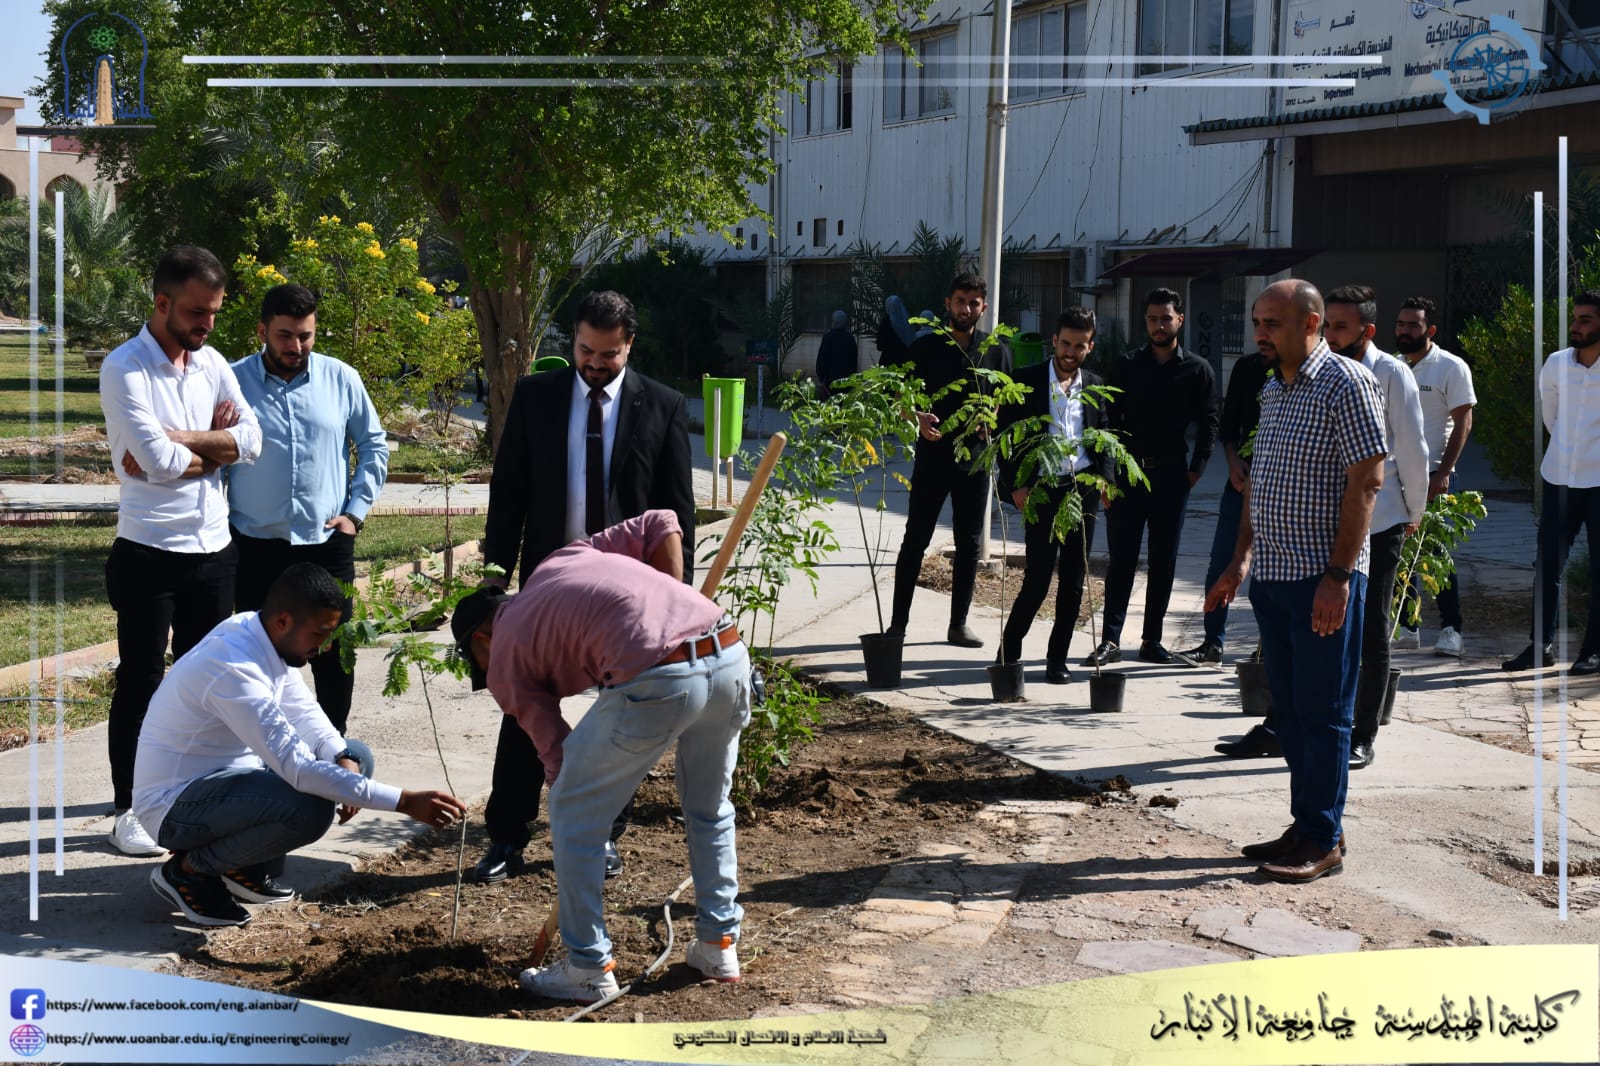 olunteer campaign to plant some seedlings in the college gardens,